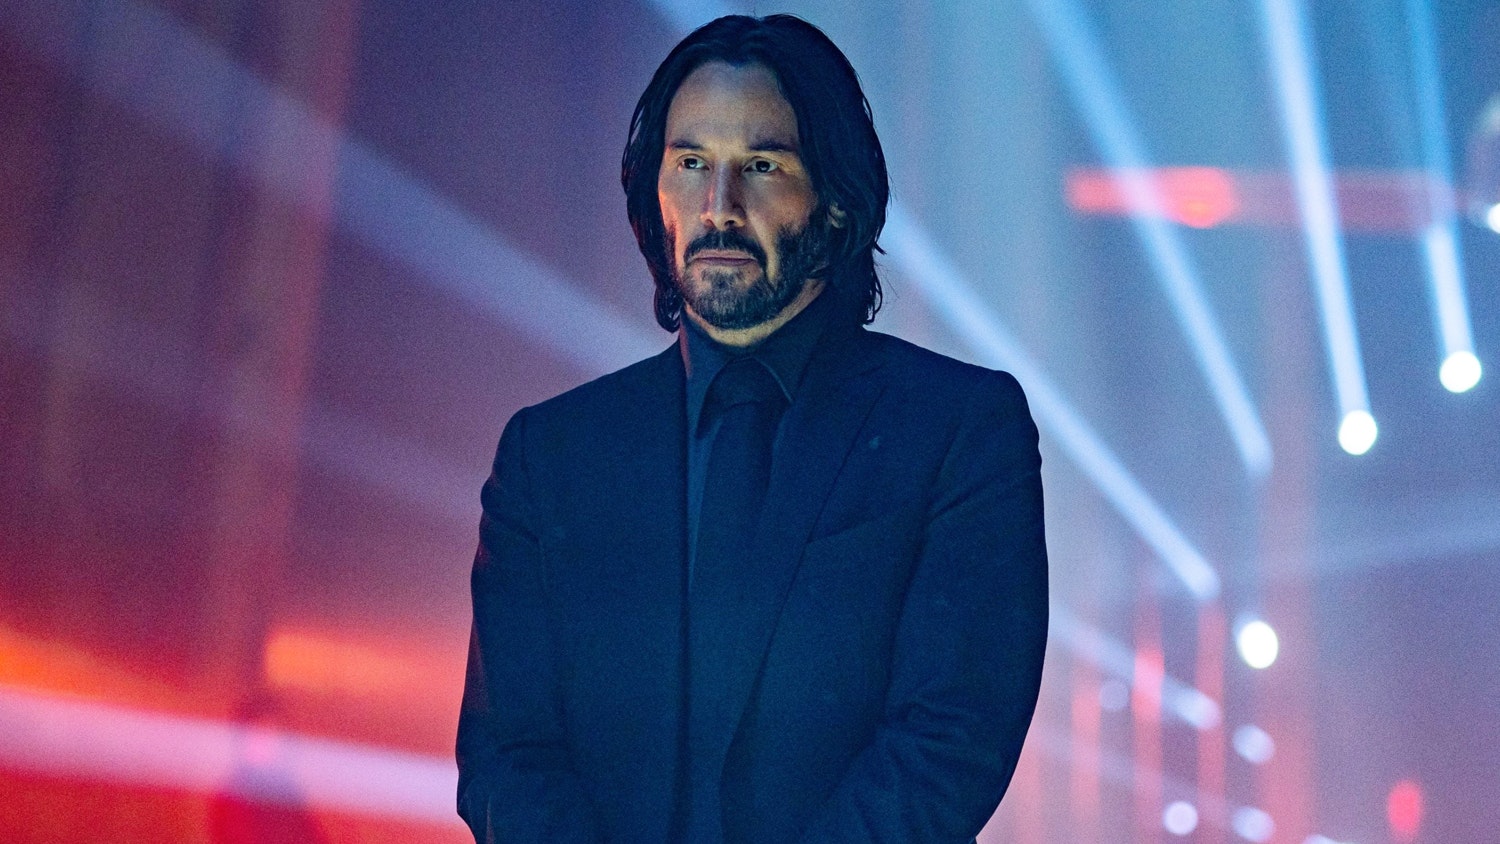 When will John Wick 4 be available to stream at home?